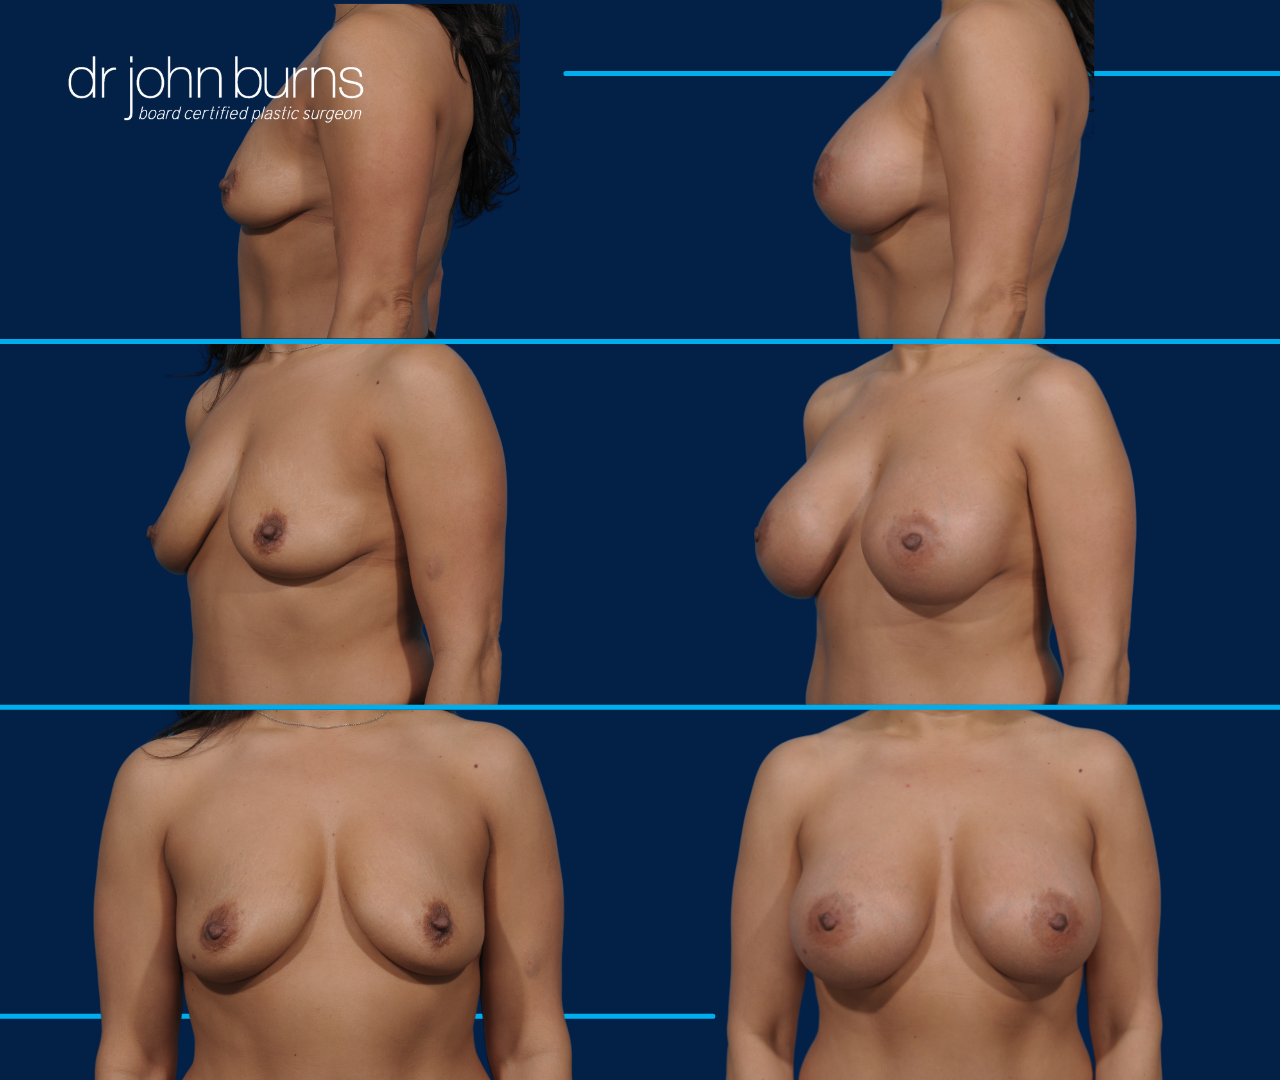 B to D Breast augmentation results by Dr. John Burns